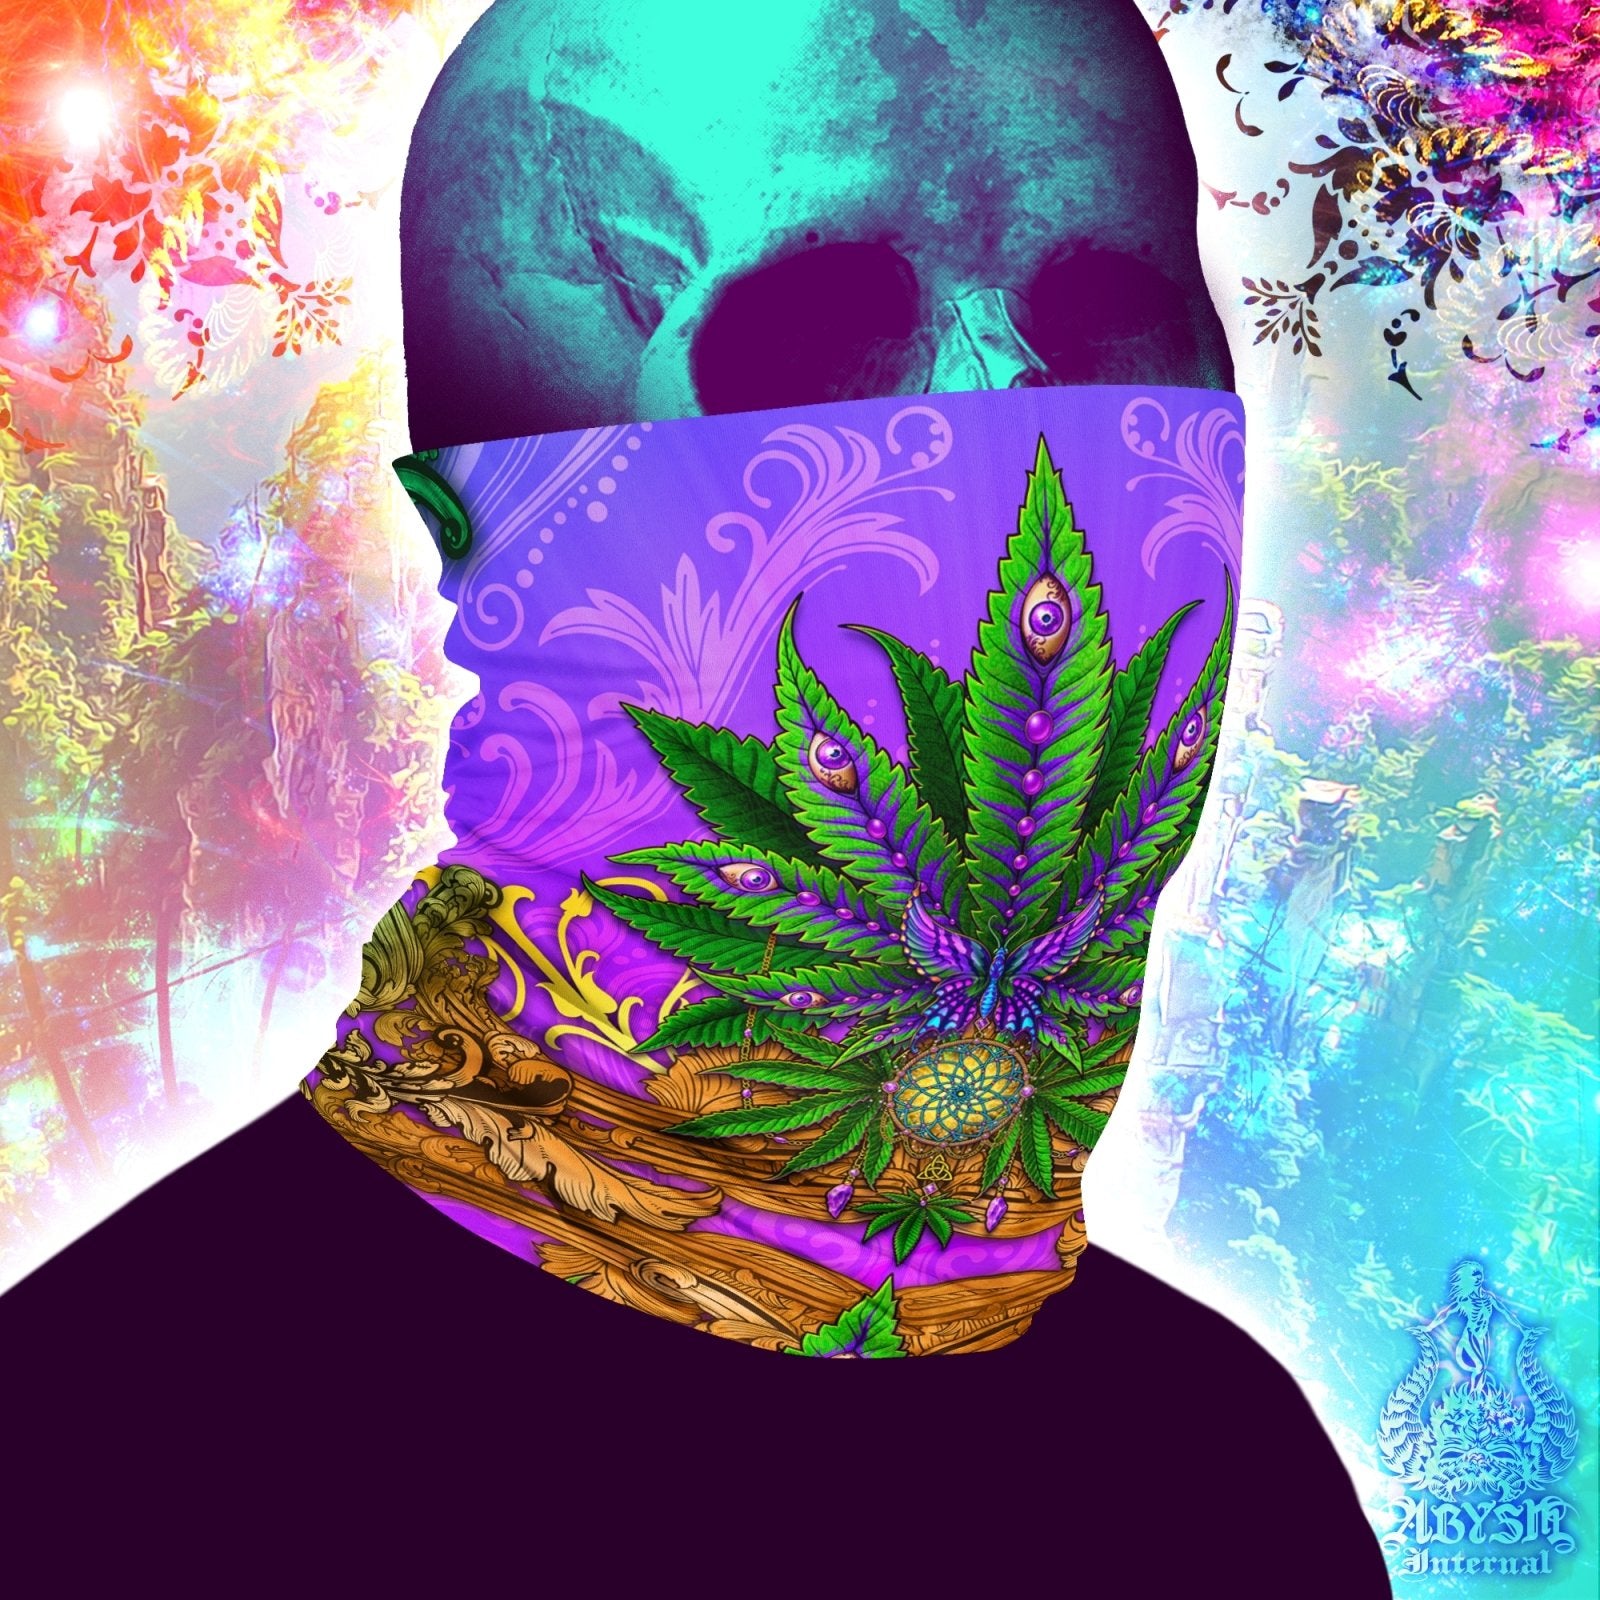 Cannabis Neck Gaiter, Weed Face Mask, Marijuana Head Covering, Indie Festival Outfit, 420 Gift - Nature - Abysm Internal